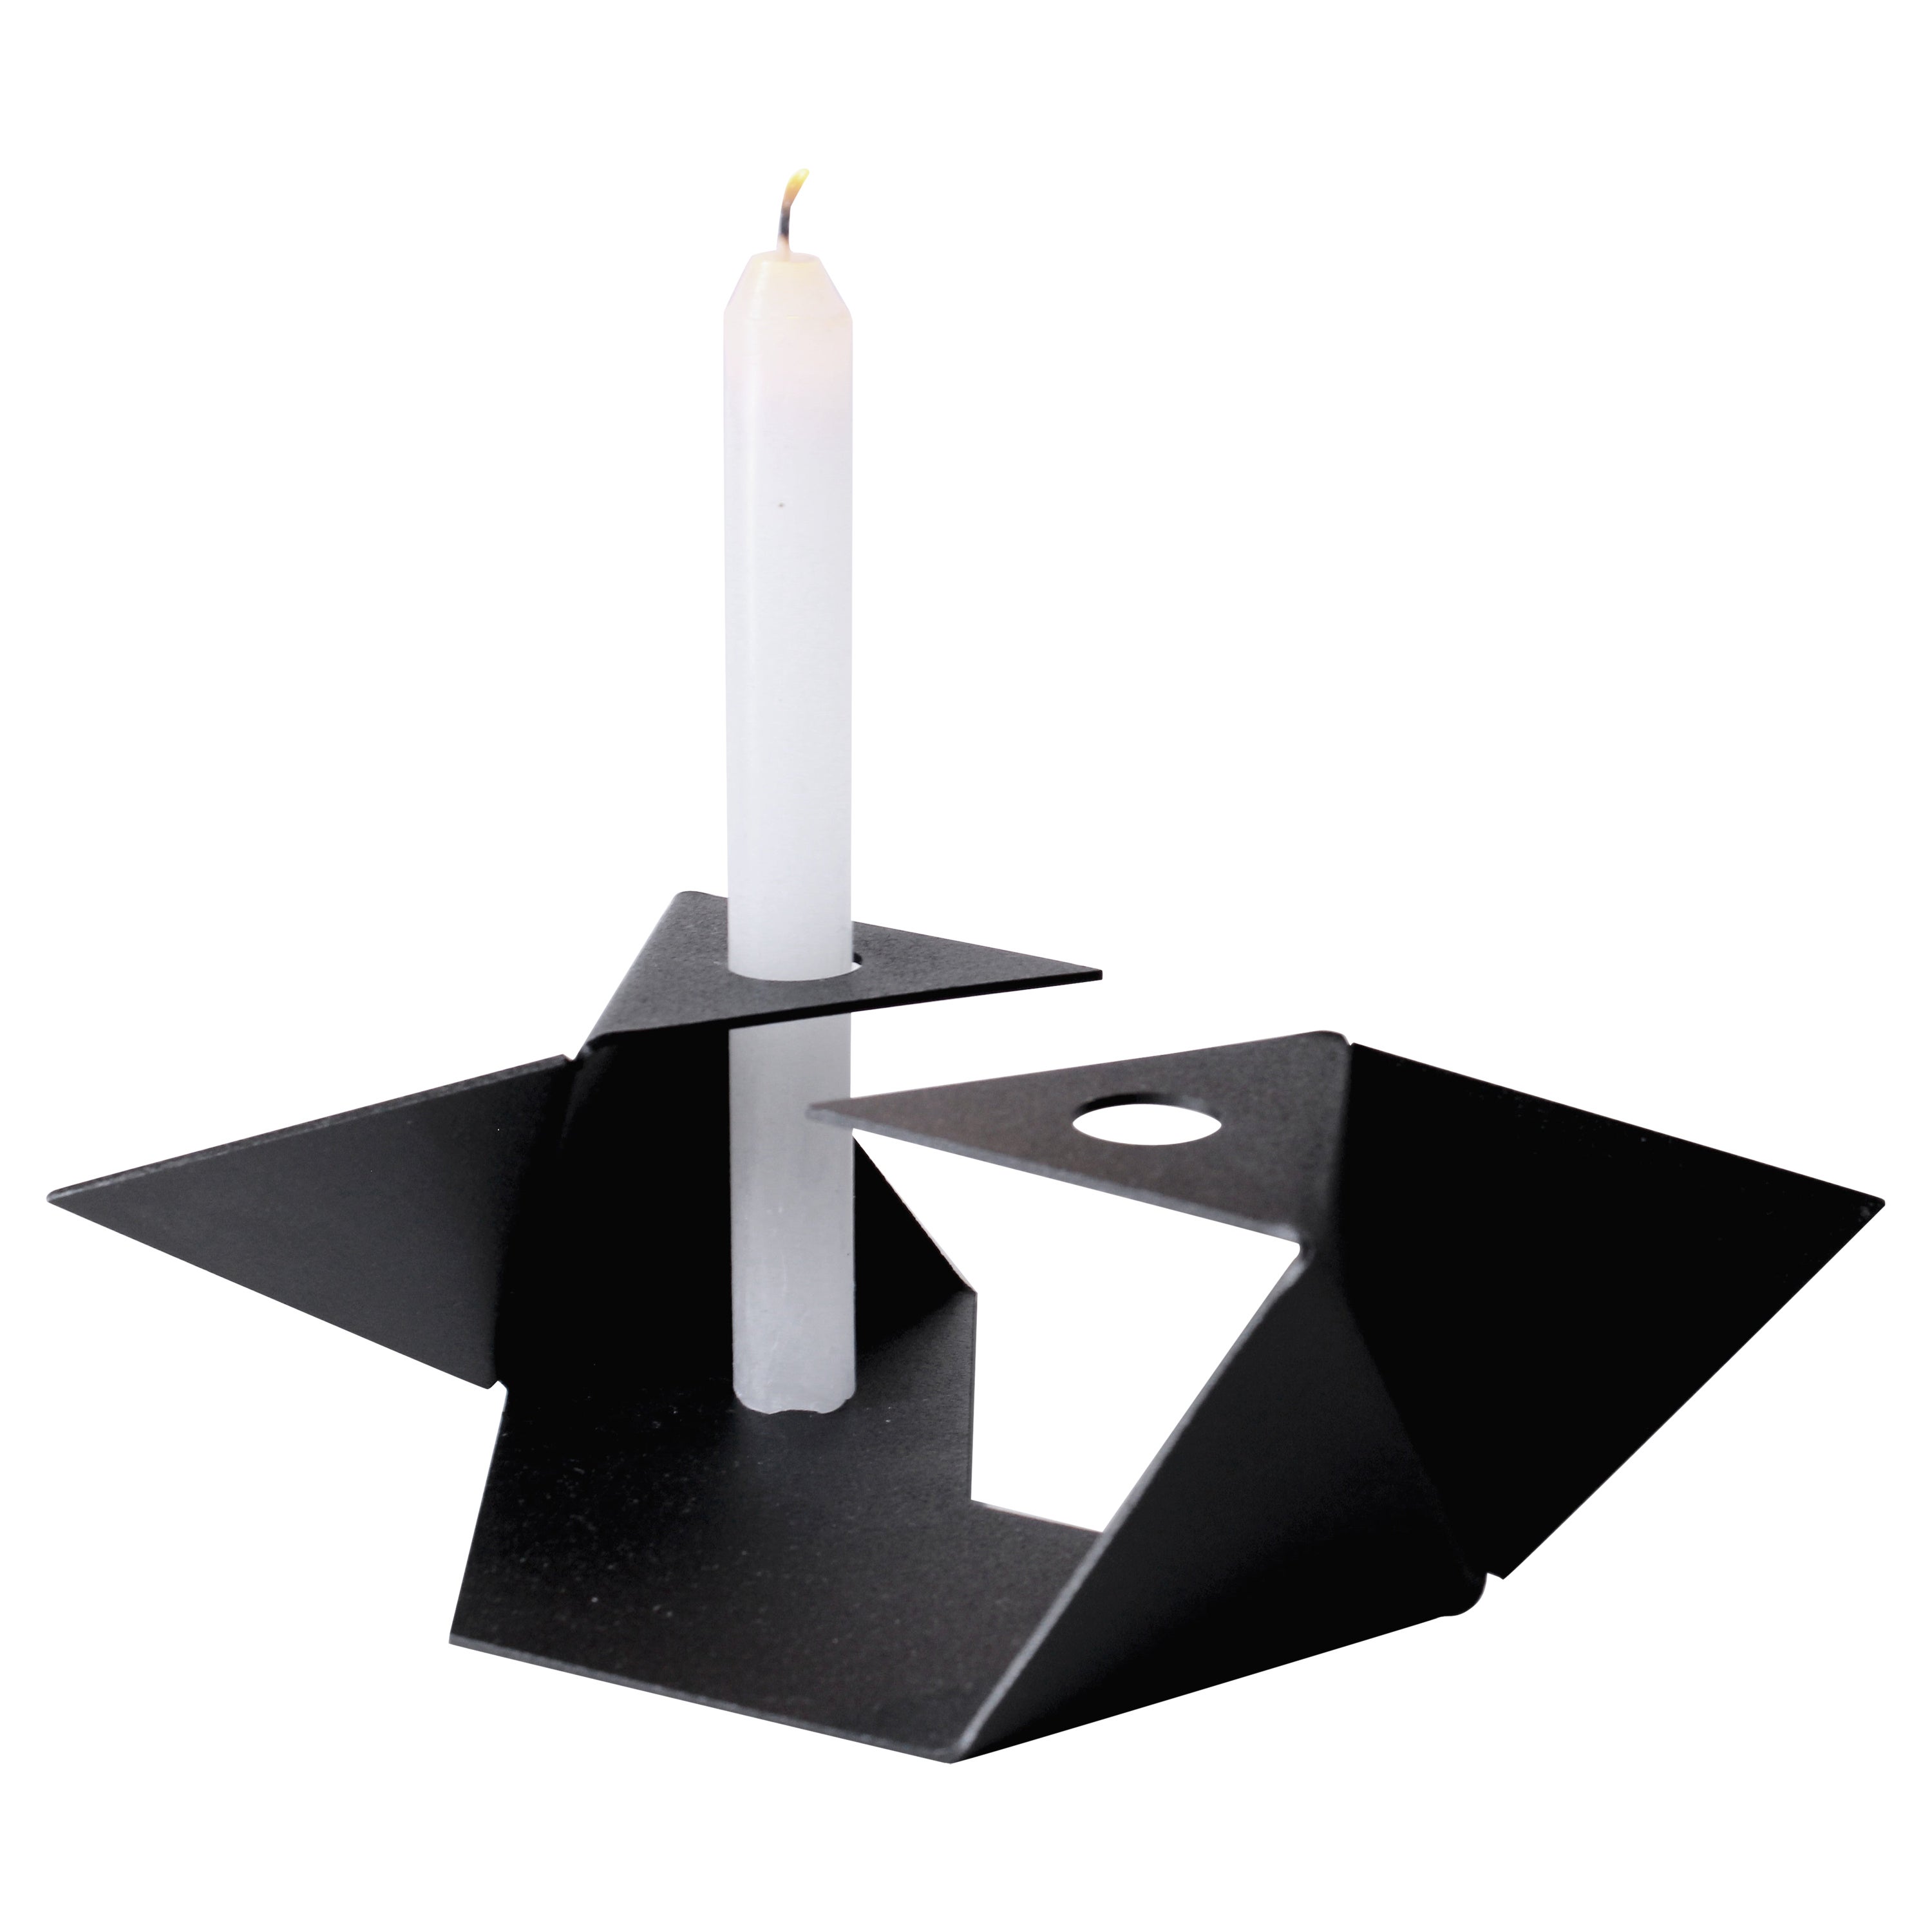 Black Platonic candleholder (two candles) by Gabriel Freitas For Sale